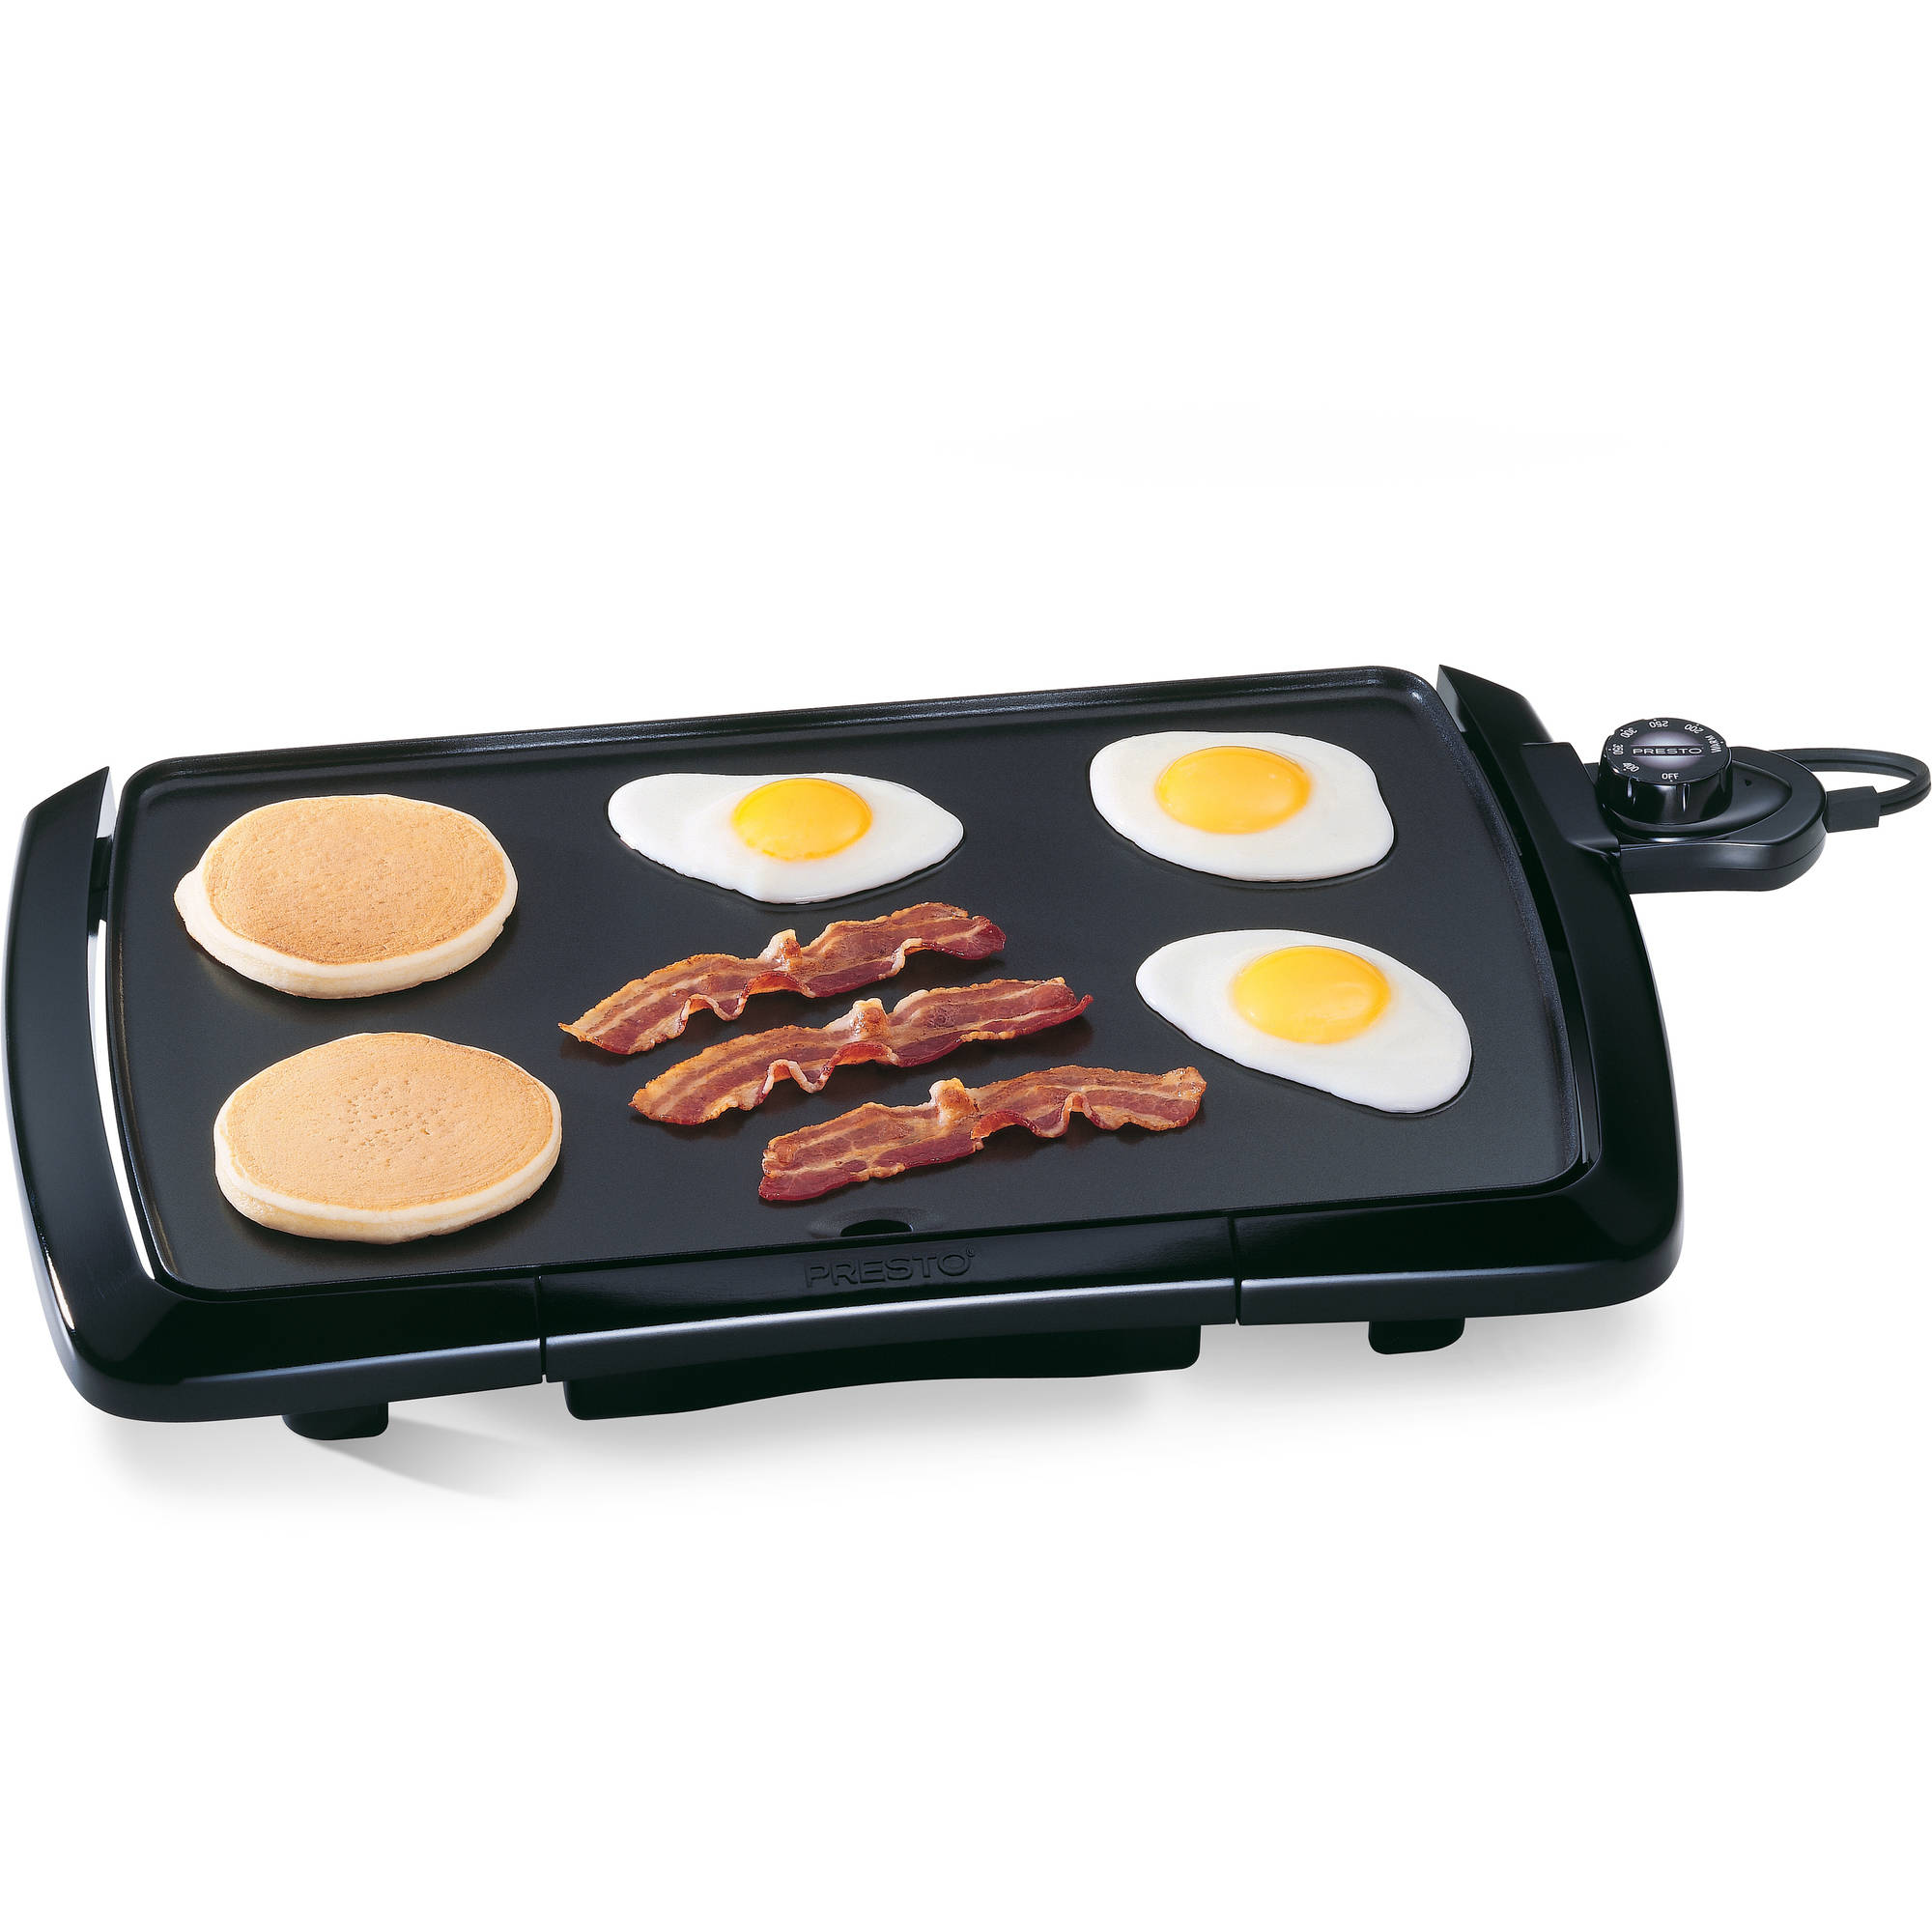 Presto Cool Touch Electric Griddle Nonstick Coating Walmart 